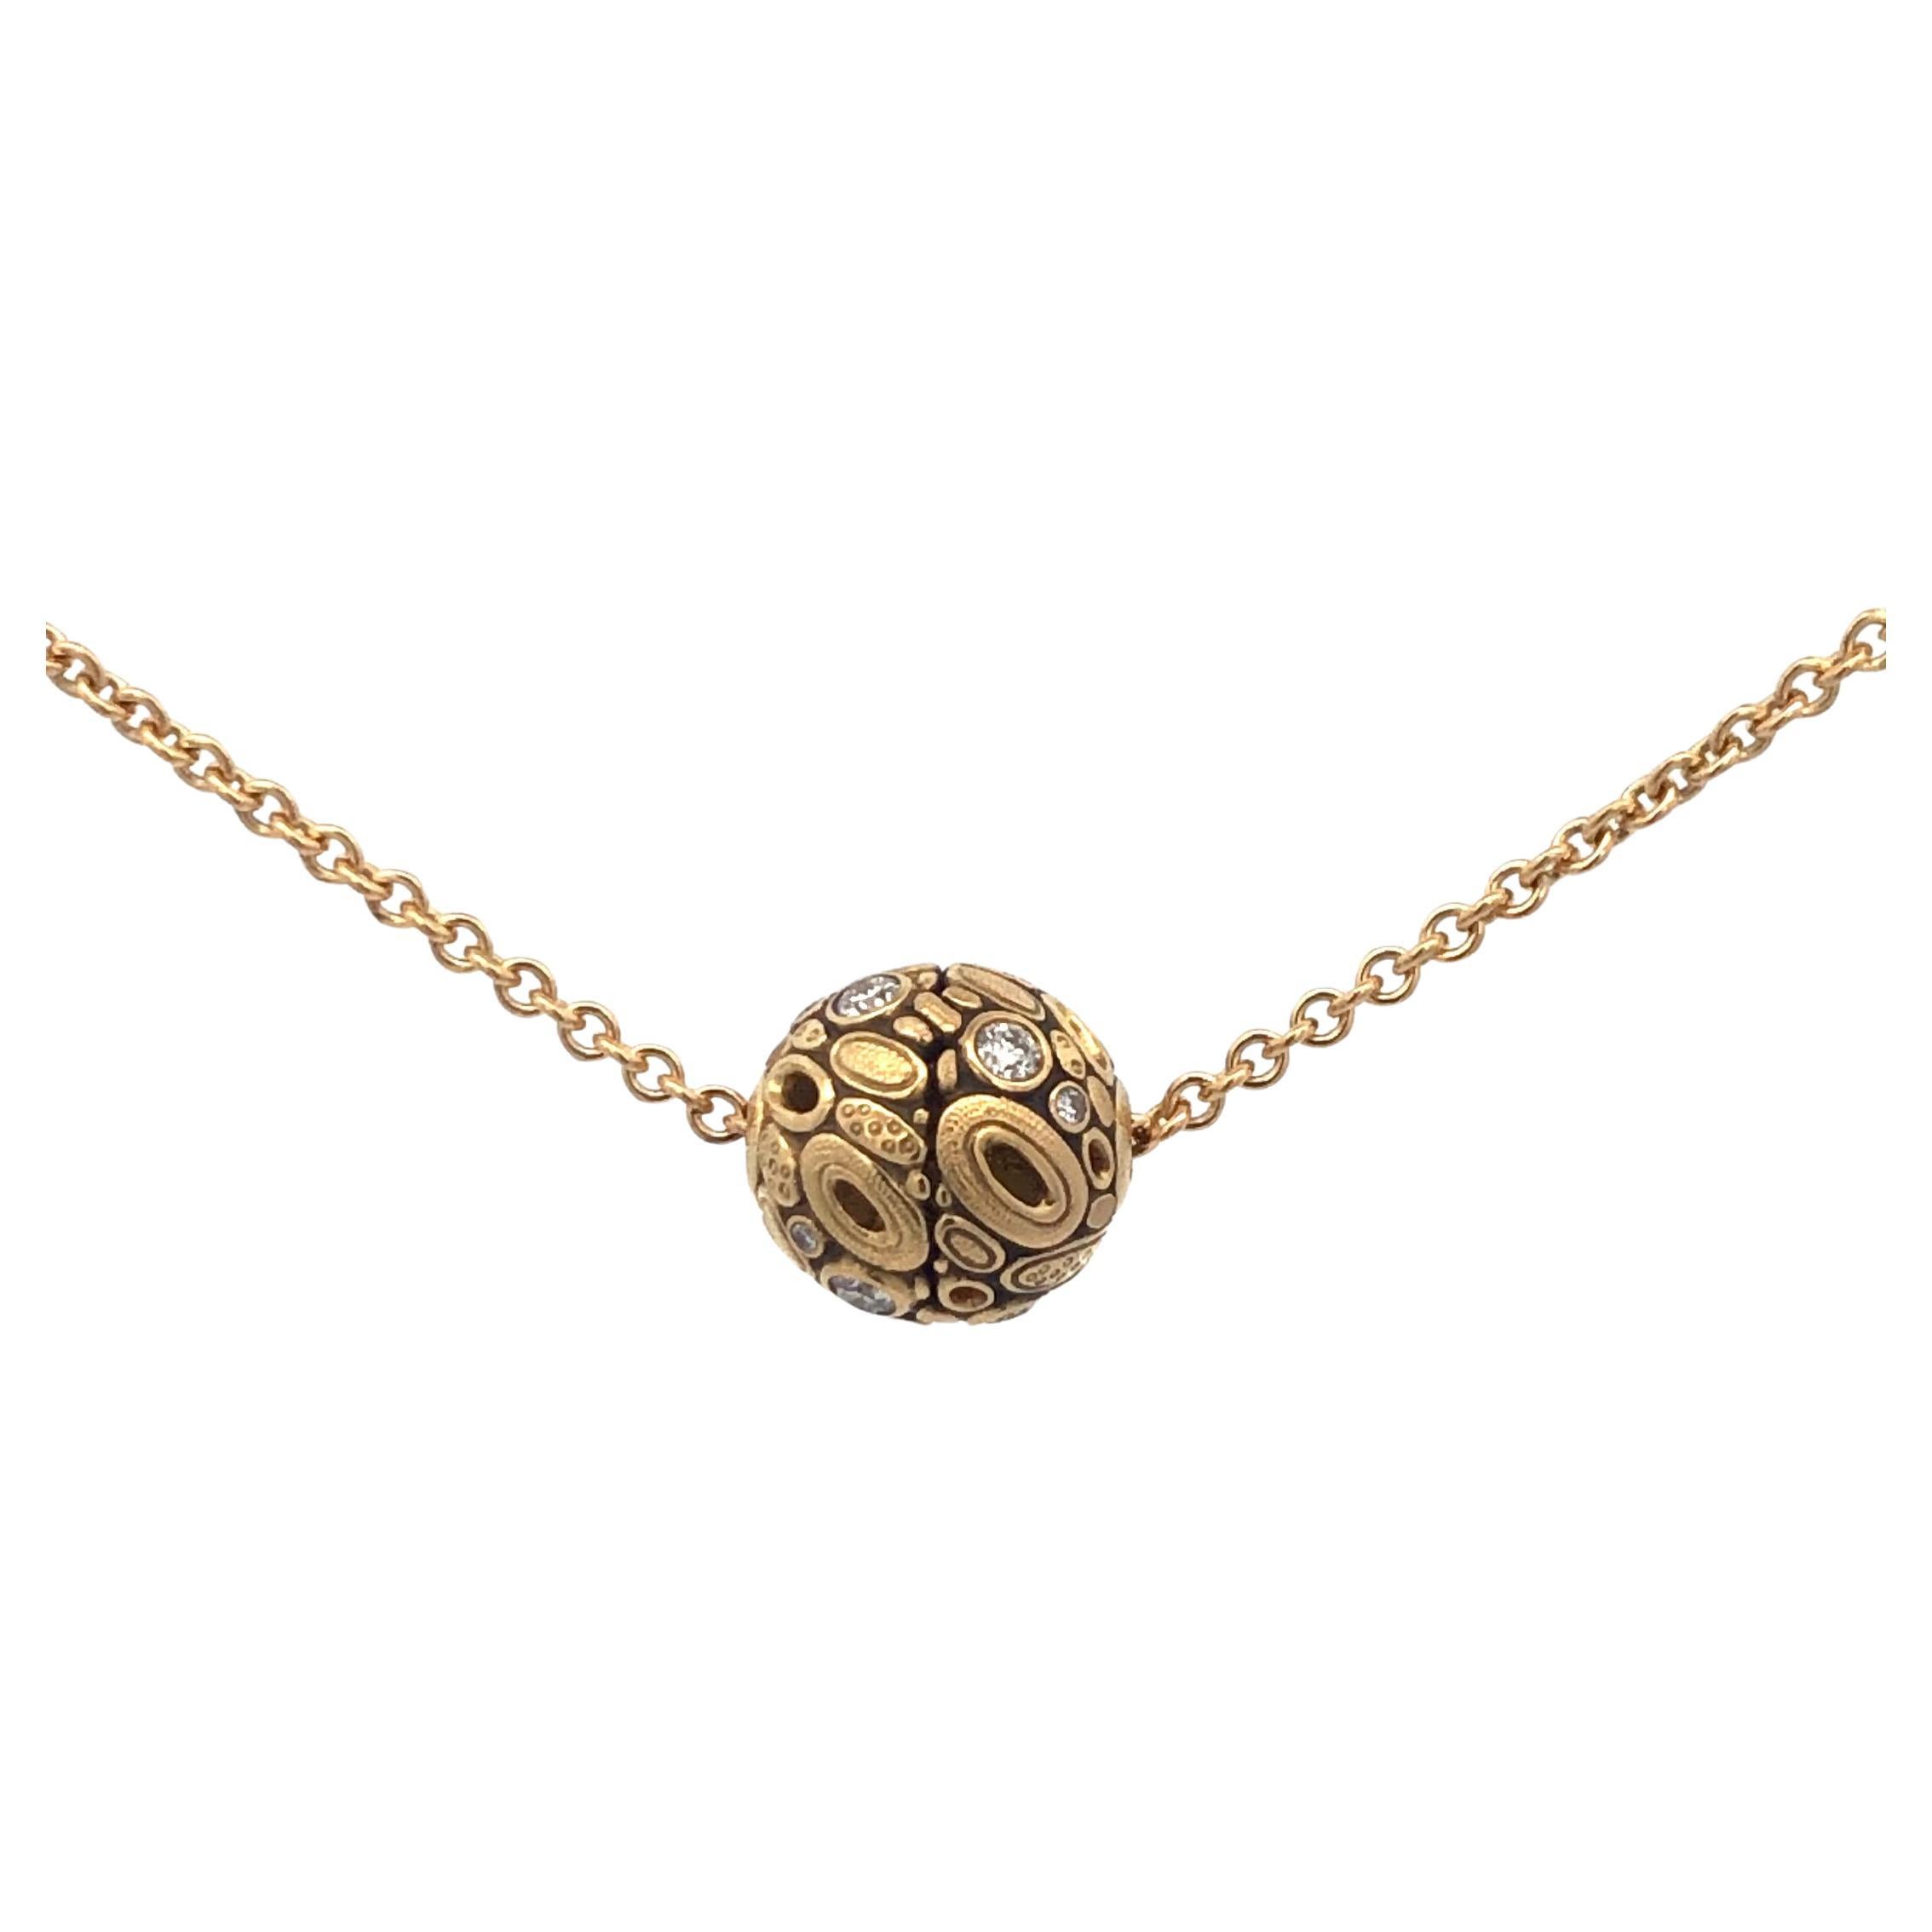 Alex Spkus 'Open Ovals' Ball Pendant with Diamonds on 18'' Chain, 18K Yellow Gol For Sale